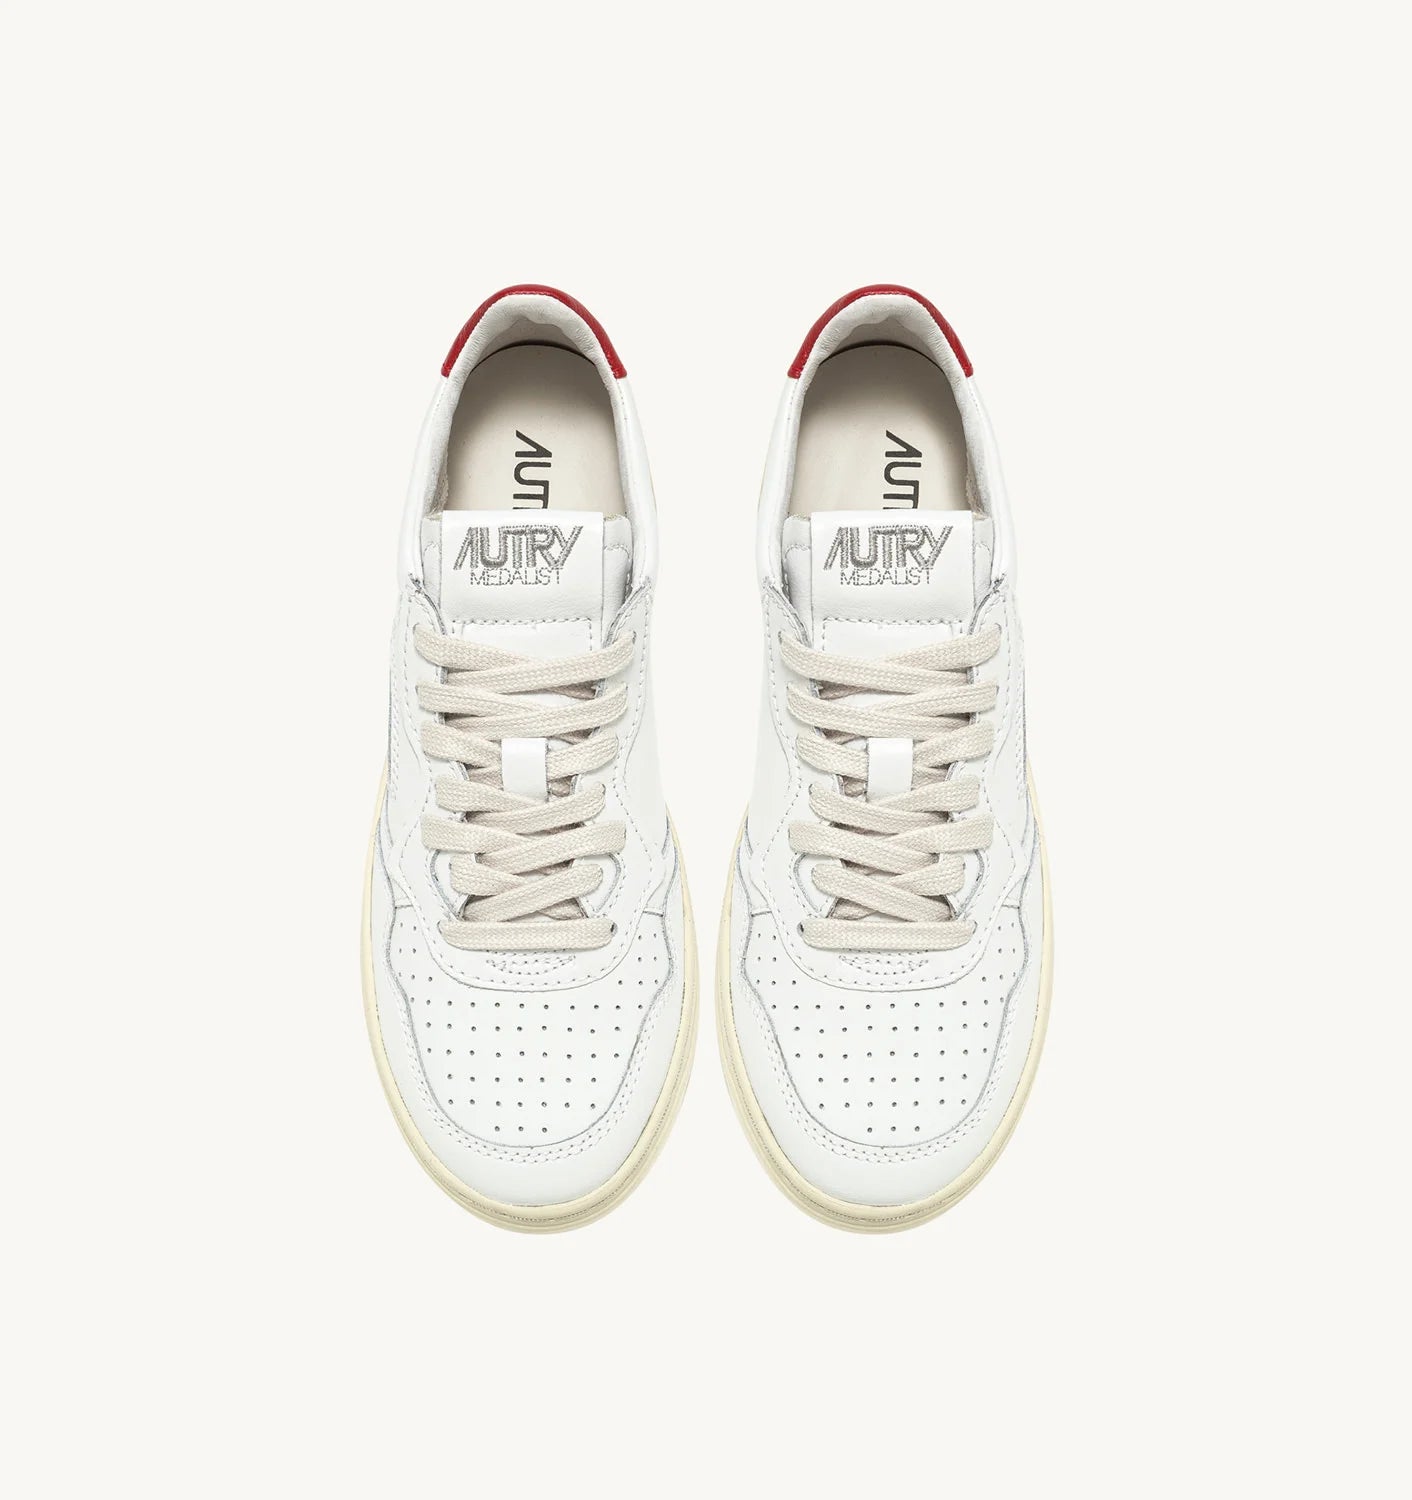 Autry LL21 White/Red sneakers